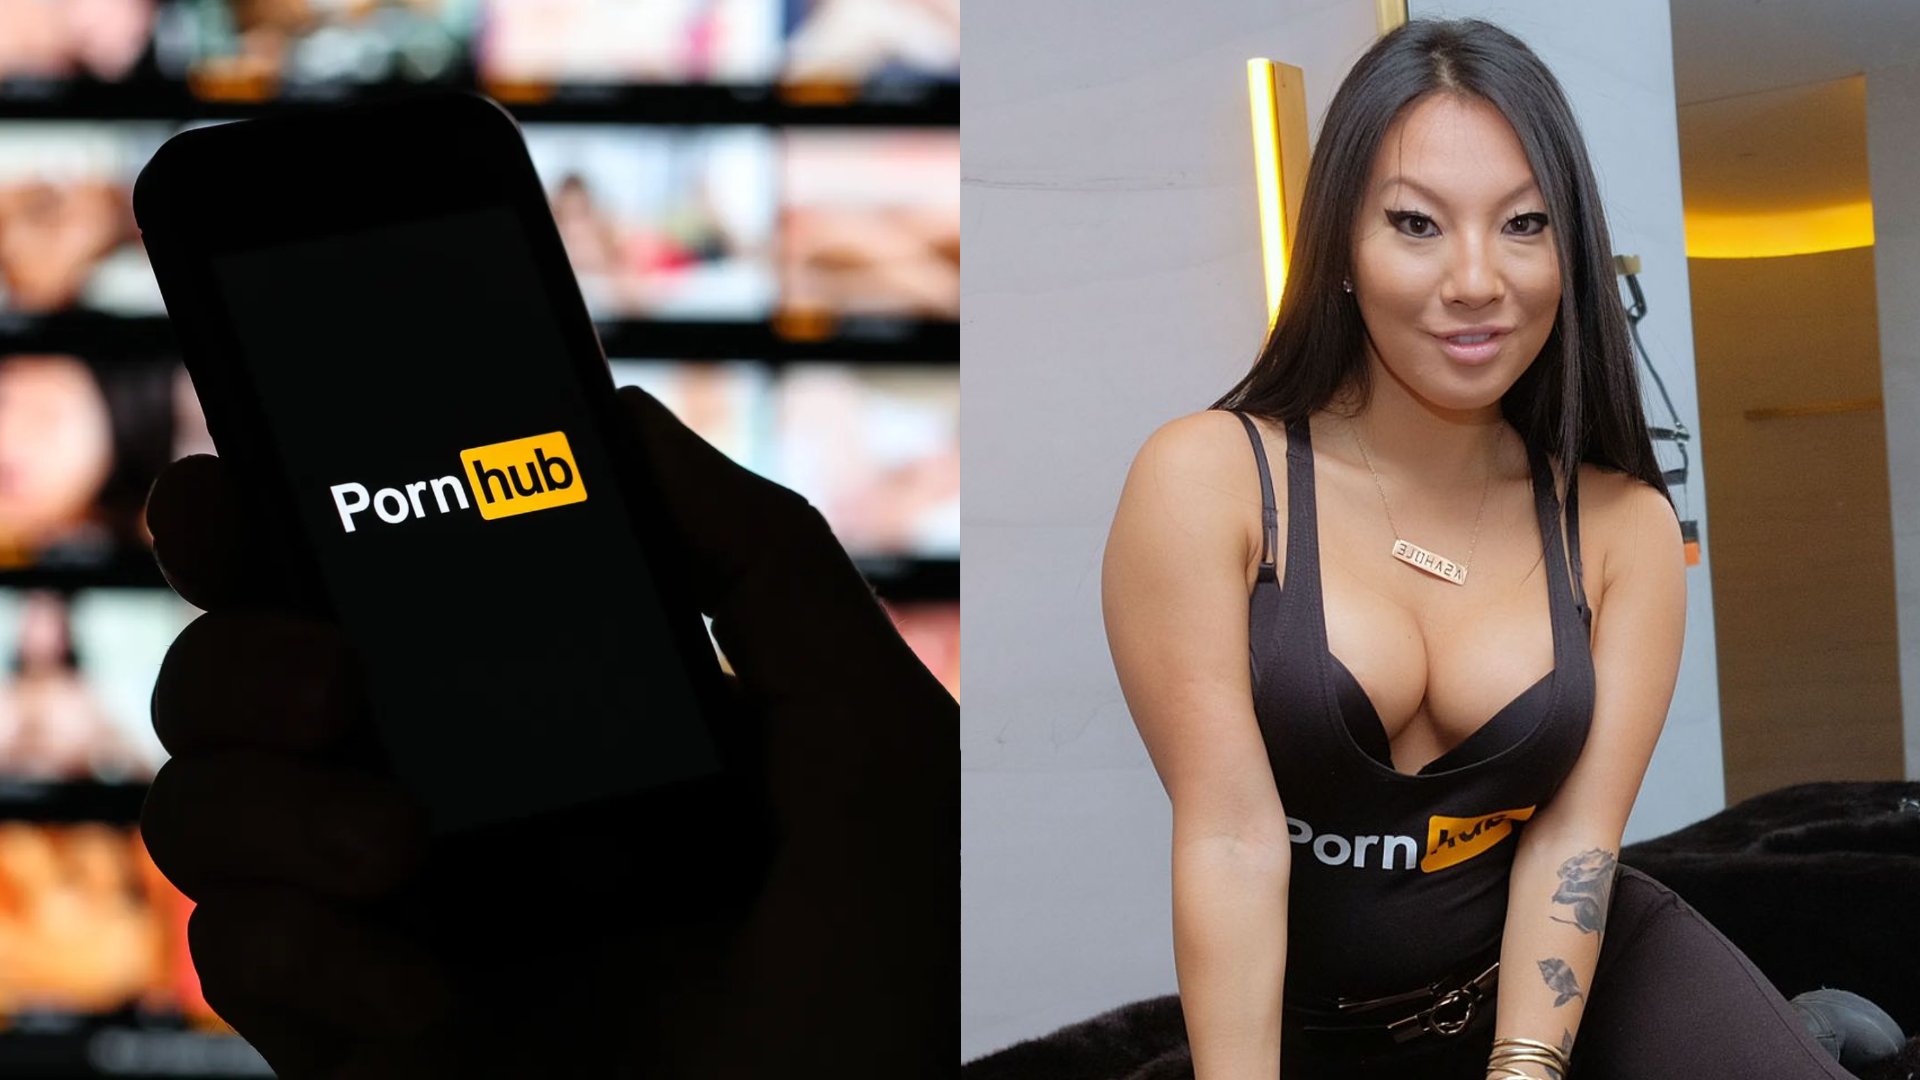 Porn Hub - Pornhub Sold To Private Equity Firm For Undisclosed Amount